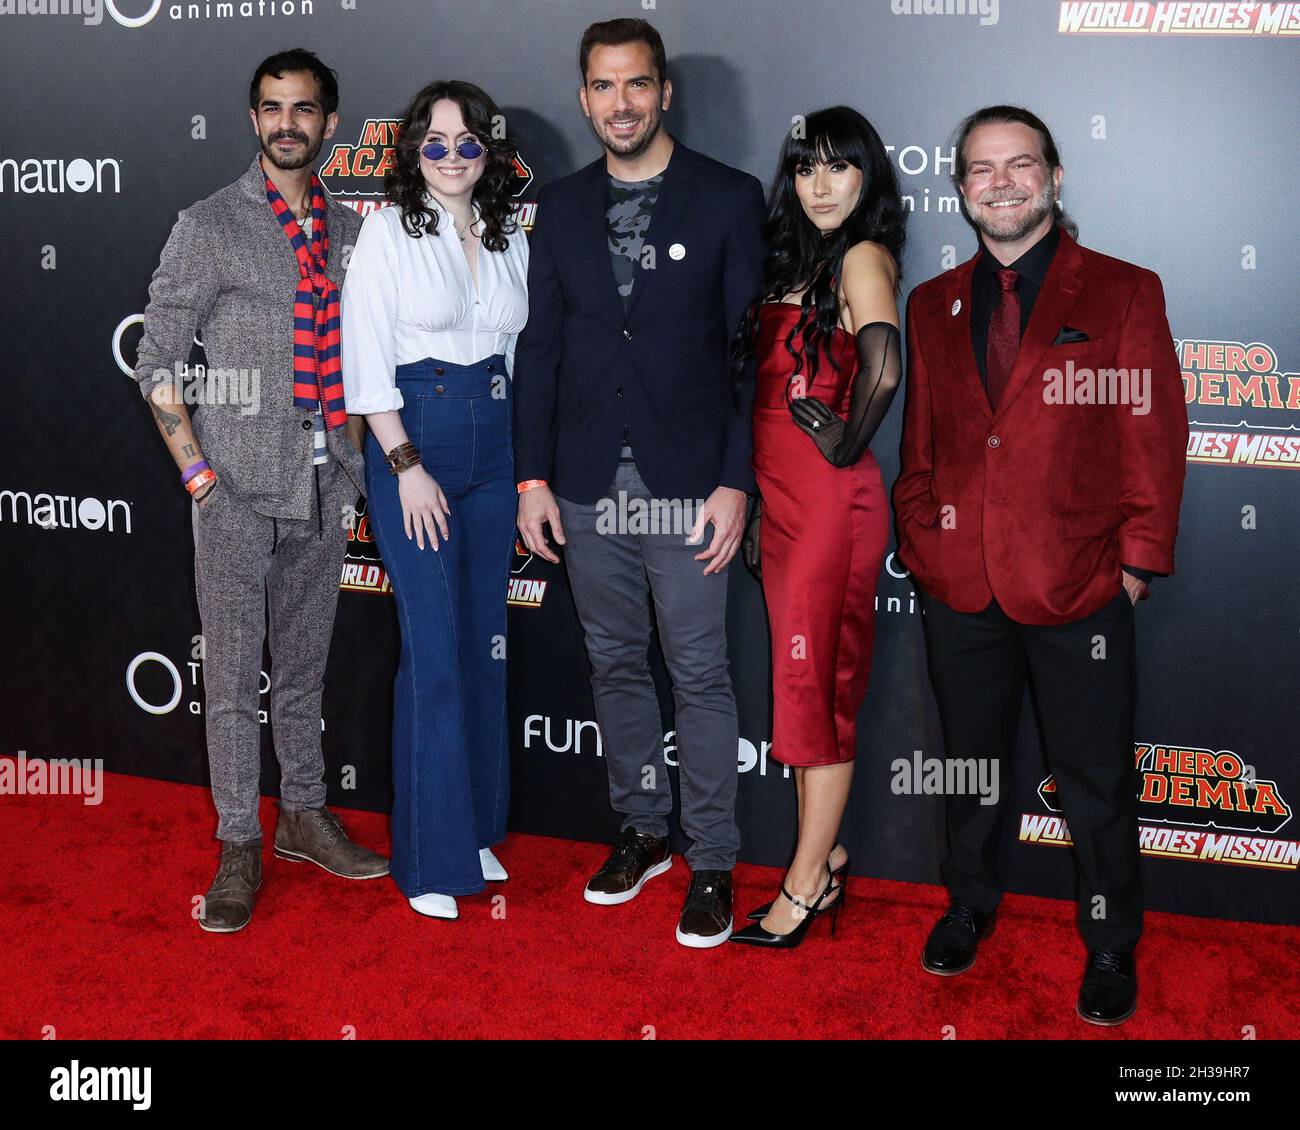 Los Angeles, United States. 26th Oct, 2021. LOS ANGELES, CALIFORNIA, USA - OCTOBER 26: Ryan Colt Levy, Sarah Roach, David Matranga, Cristina Vee and Justin Cook arrive at the Los Angeles Premiere Of Funimation's 'My Hero Academia: World Heroes' Mission' held at the L.A. Live Event Deck Top Floor Of The West Lot on October 26, 2021 in Los Angeles, California, United States. (Photo by Xavier Collin/Image Press Agency/Sipa USA) Credit: Sipa USA/Alamy Live News Stock Photo